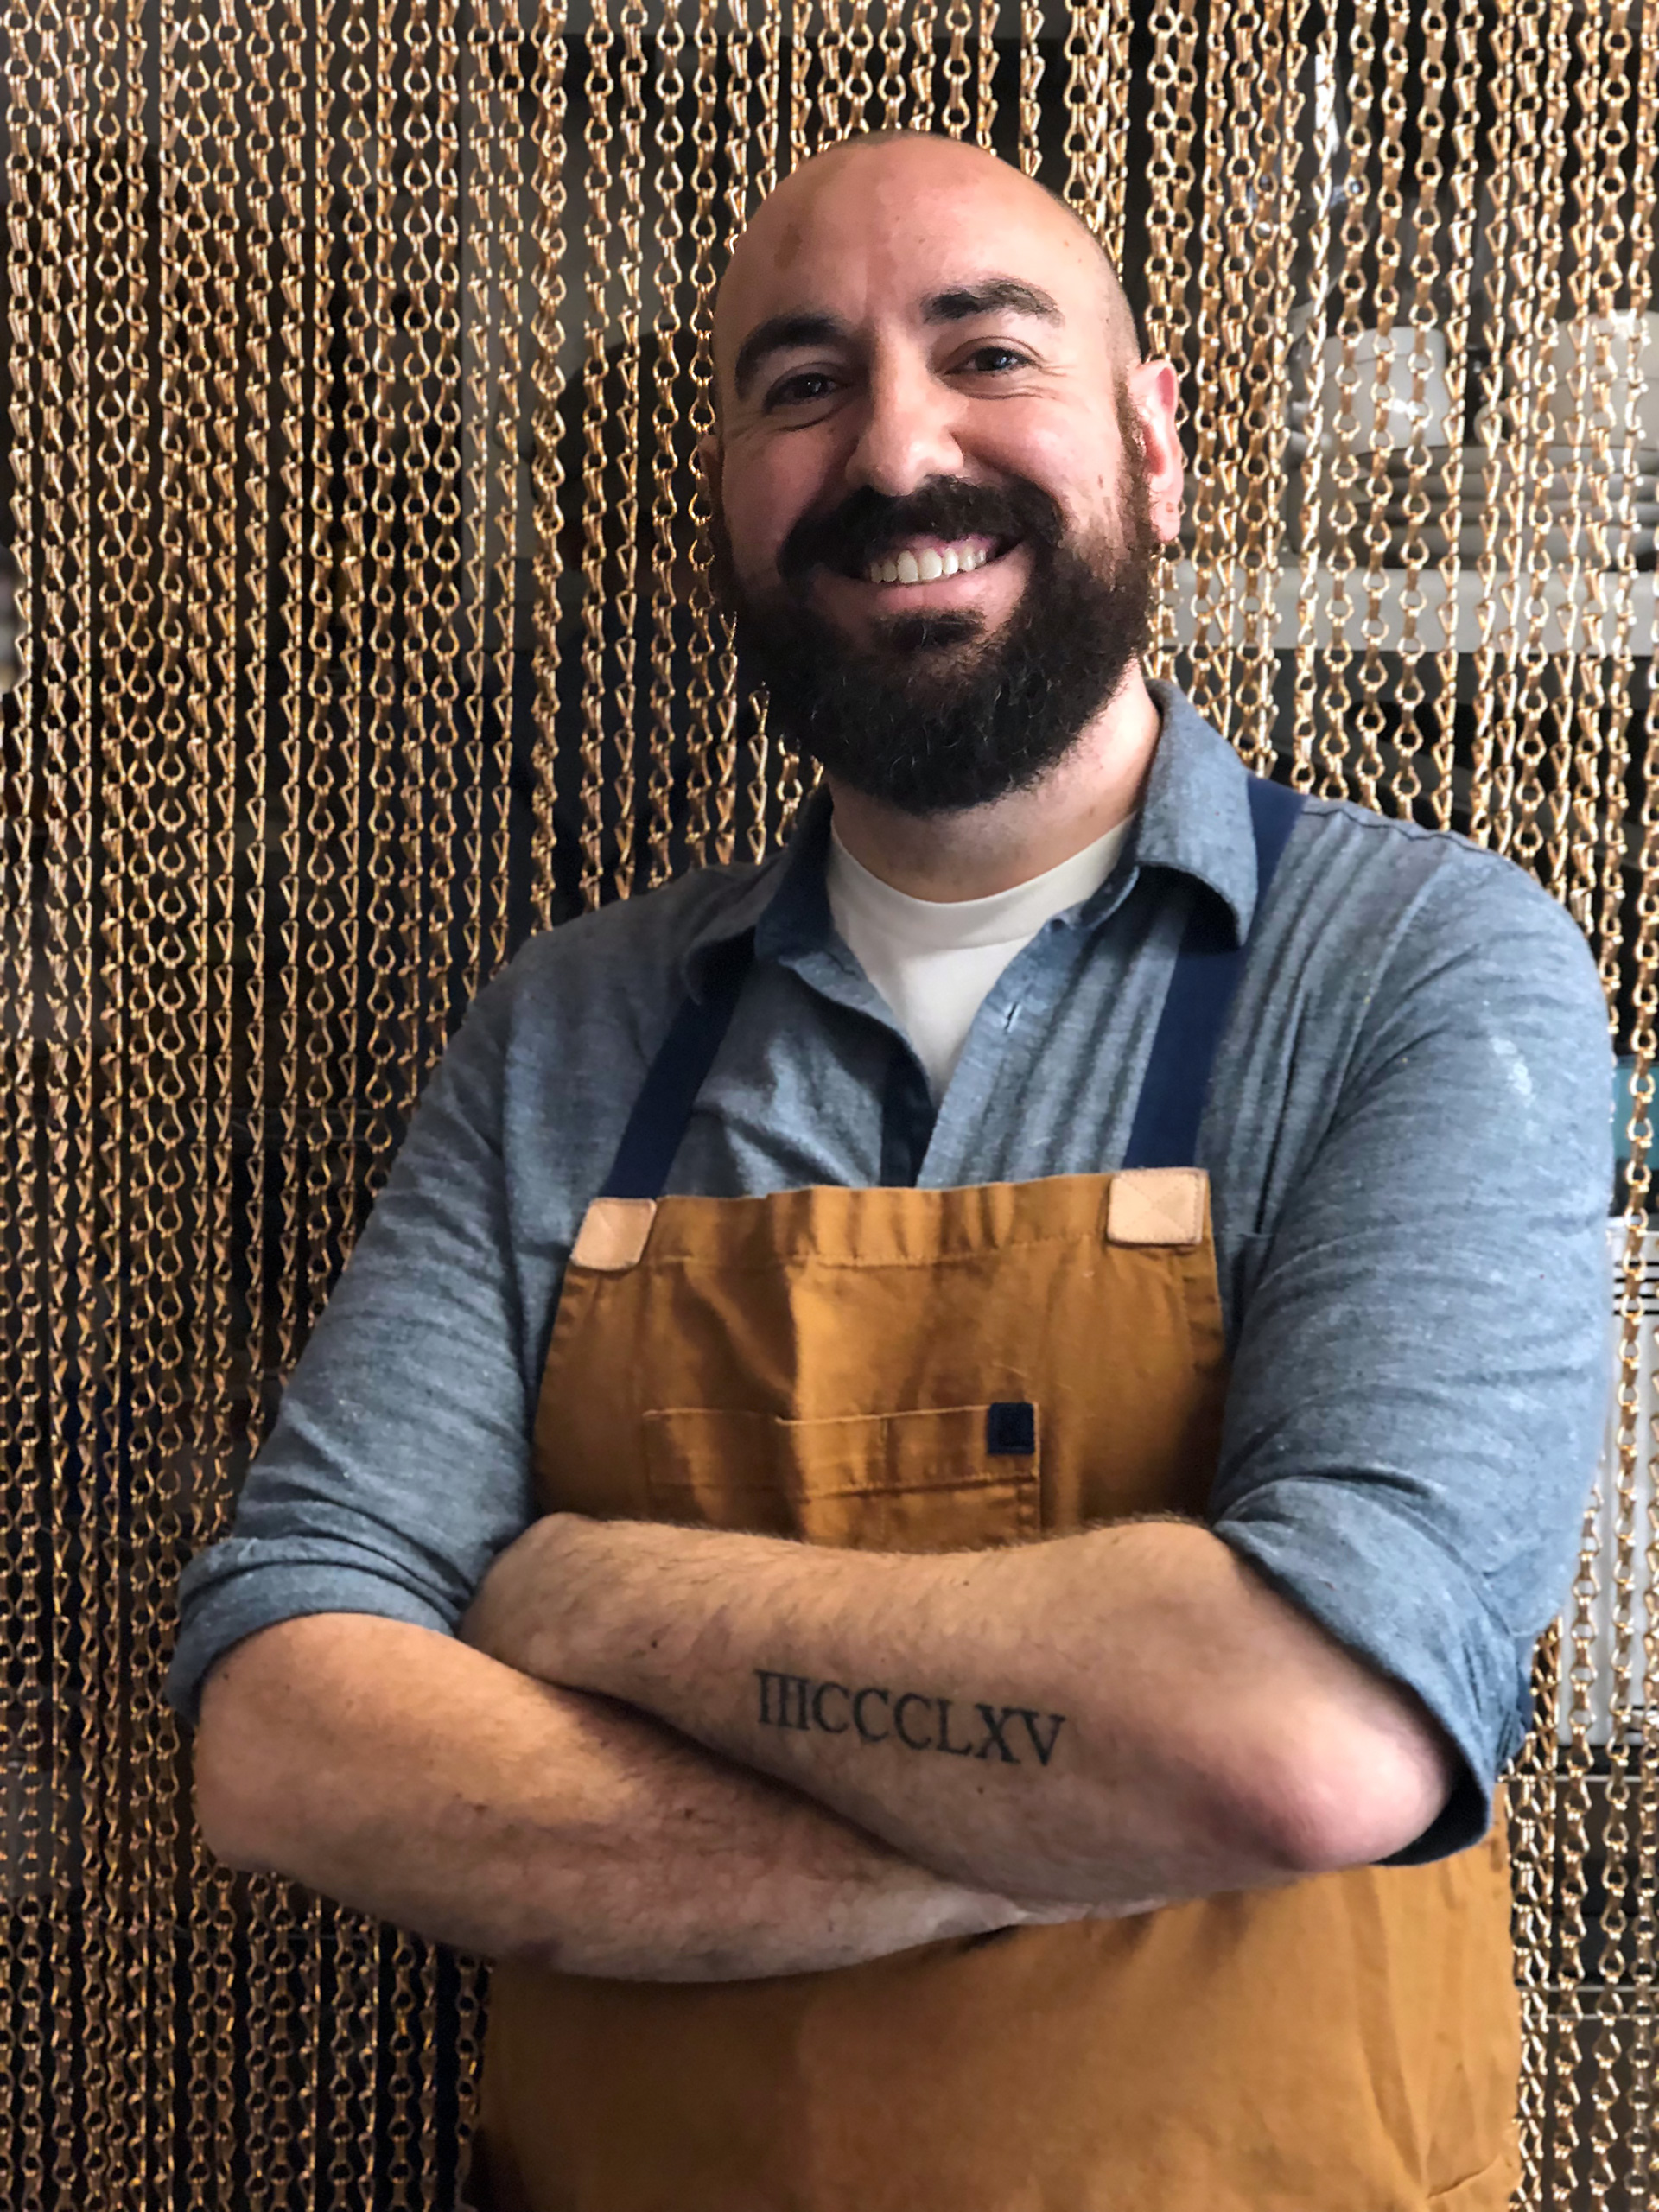 Executive Chef/Proprietor Ryan Shelton shows his recently acquired tattoo that is the address of Merchant Roots in Roman numerals.